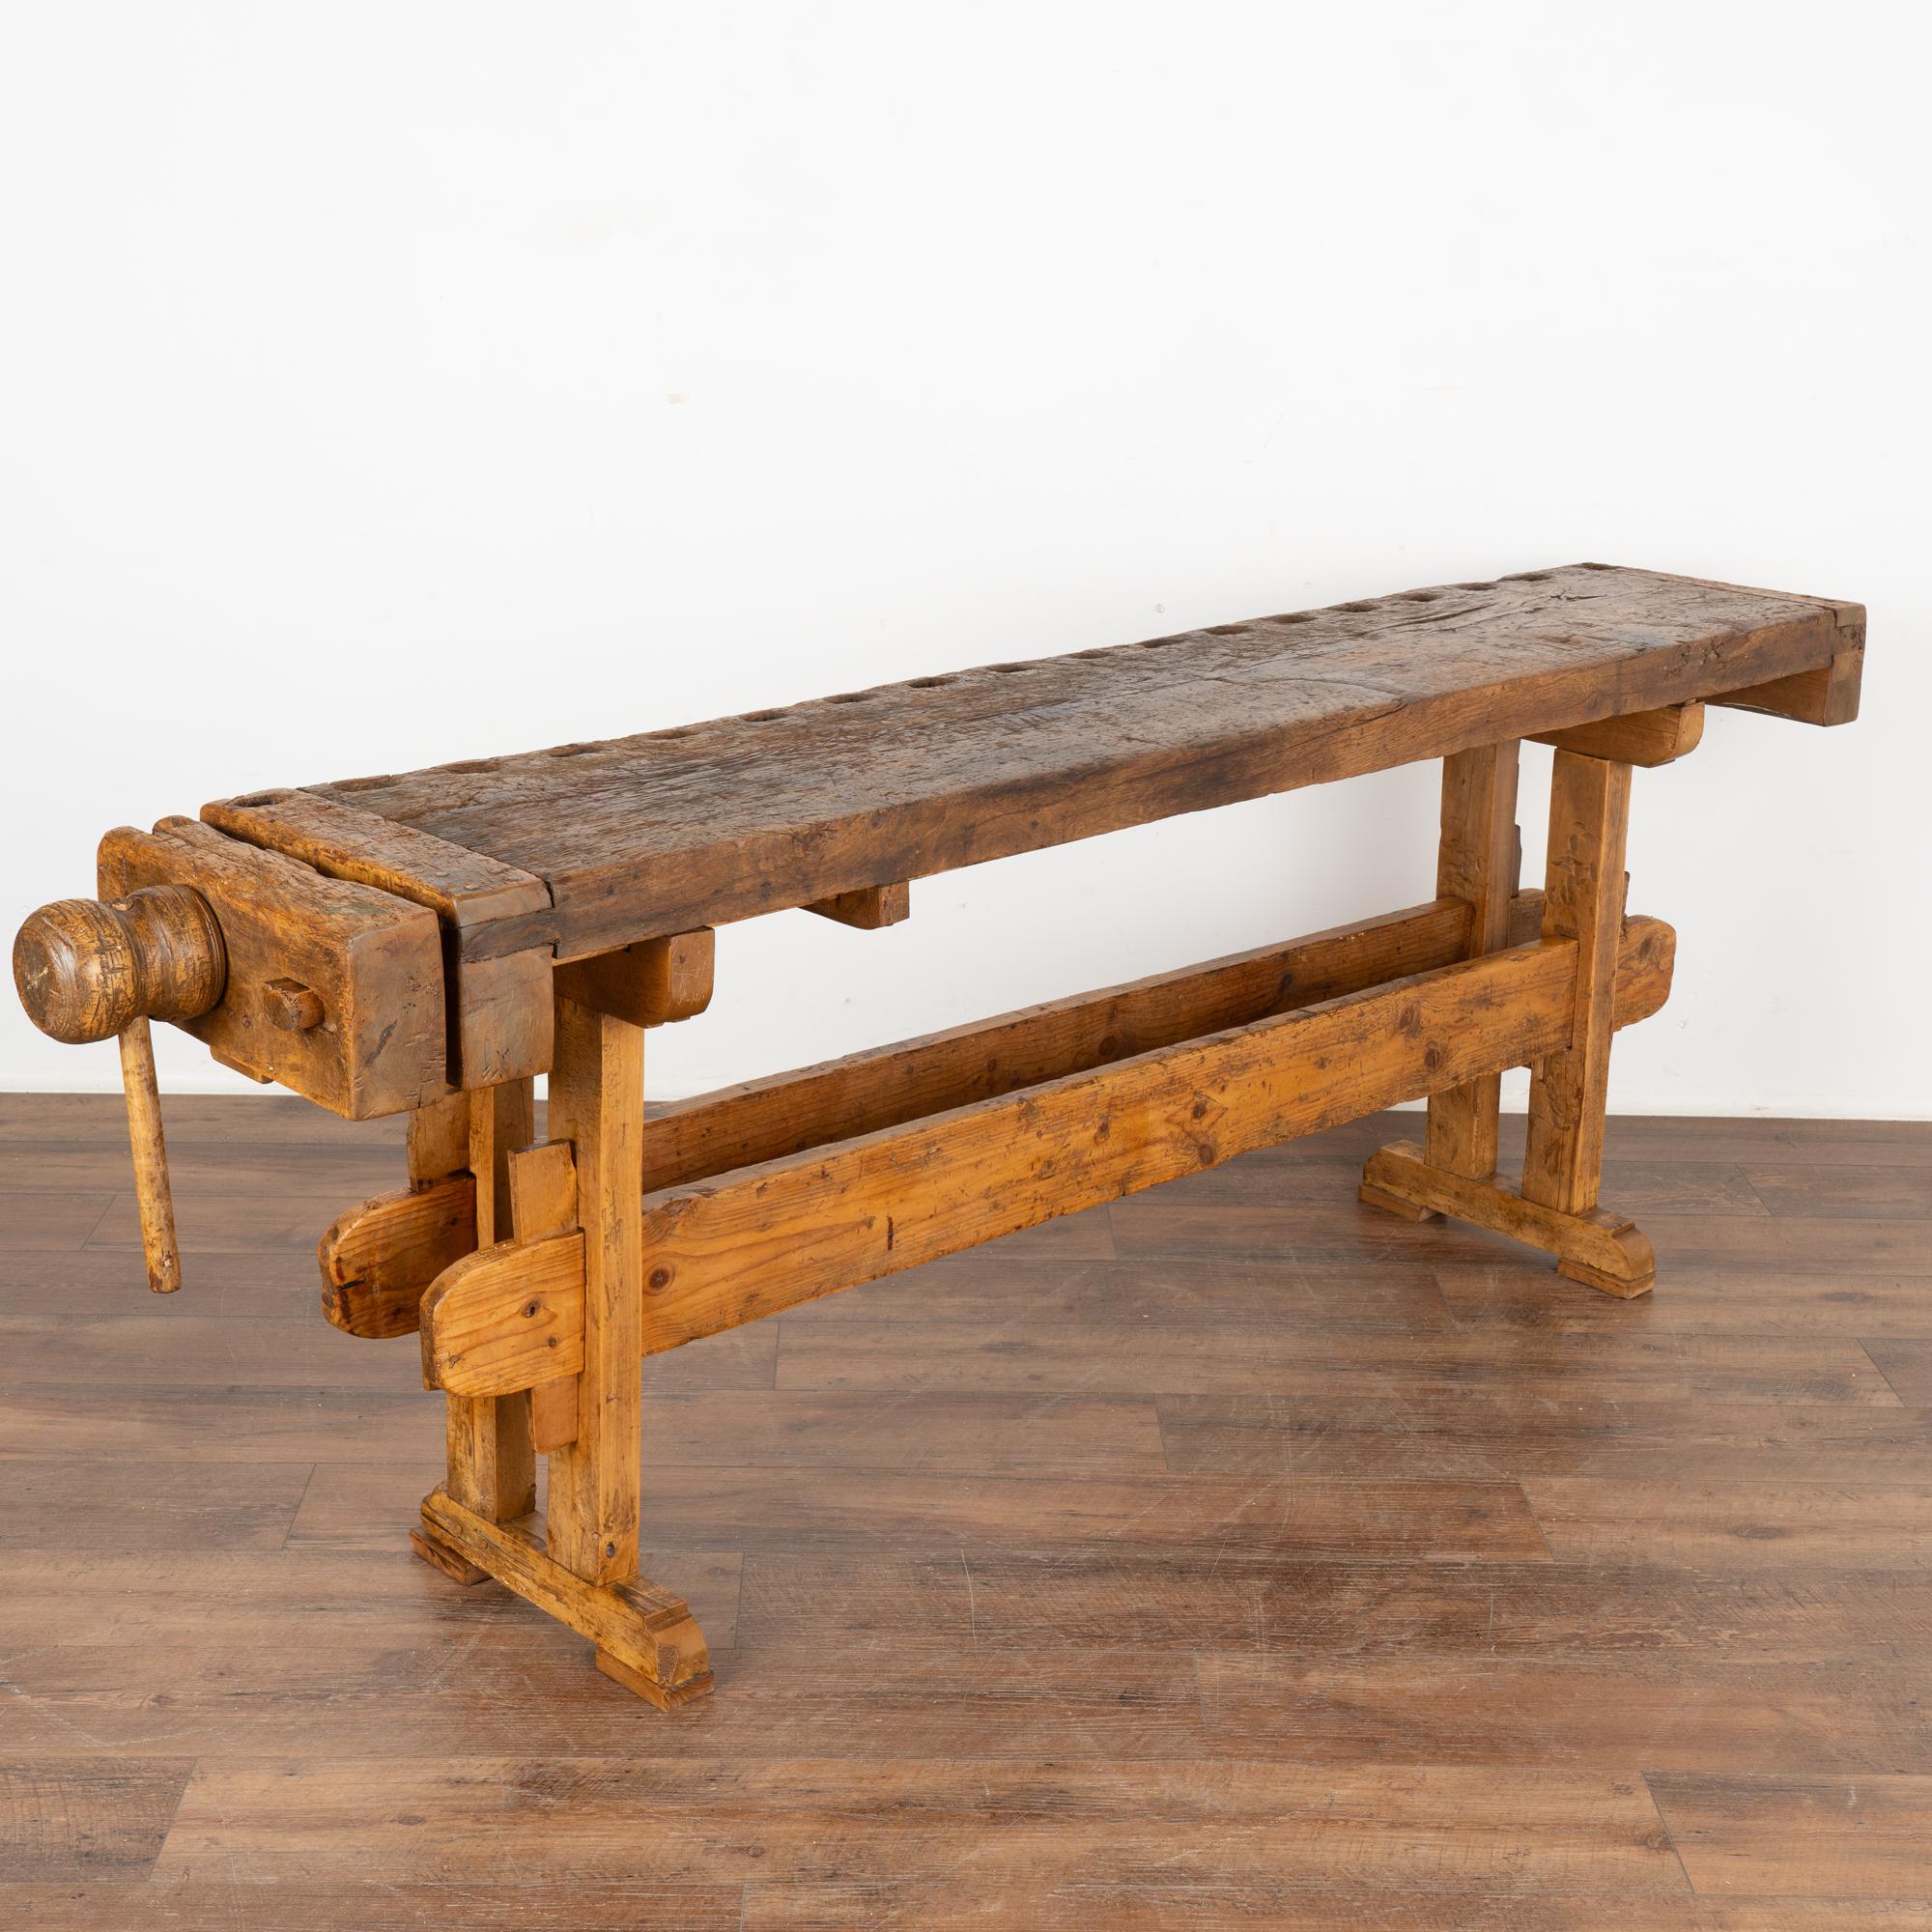 The rich patina of this old carpenter's workbench is a reflection of its age and years of use. Every ding, scratch, crack, deep gouge and stain enrich its character and appeal.
This rustic work table is narrow, at only 15.25